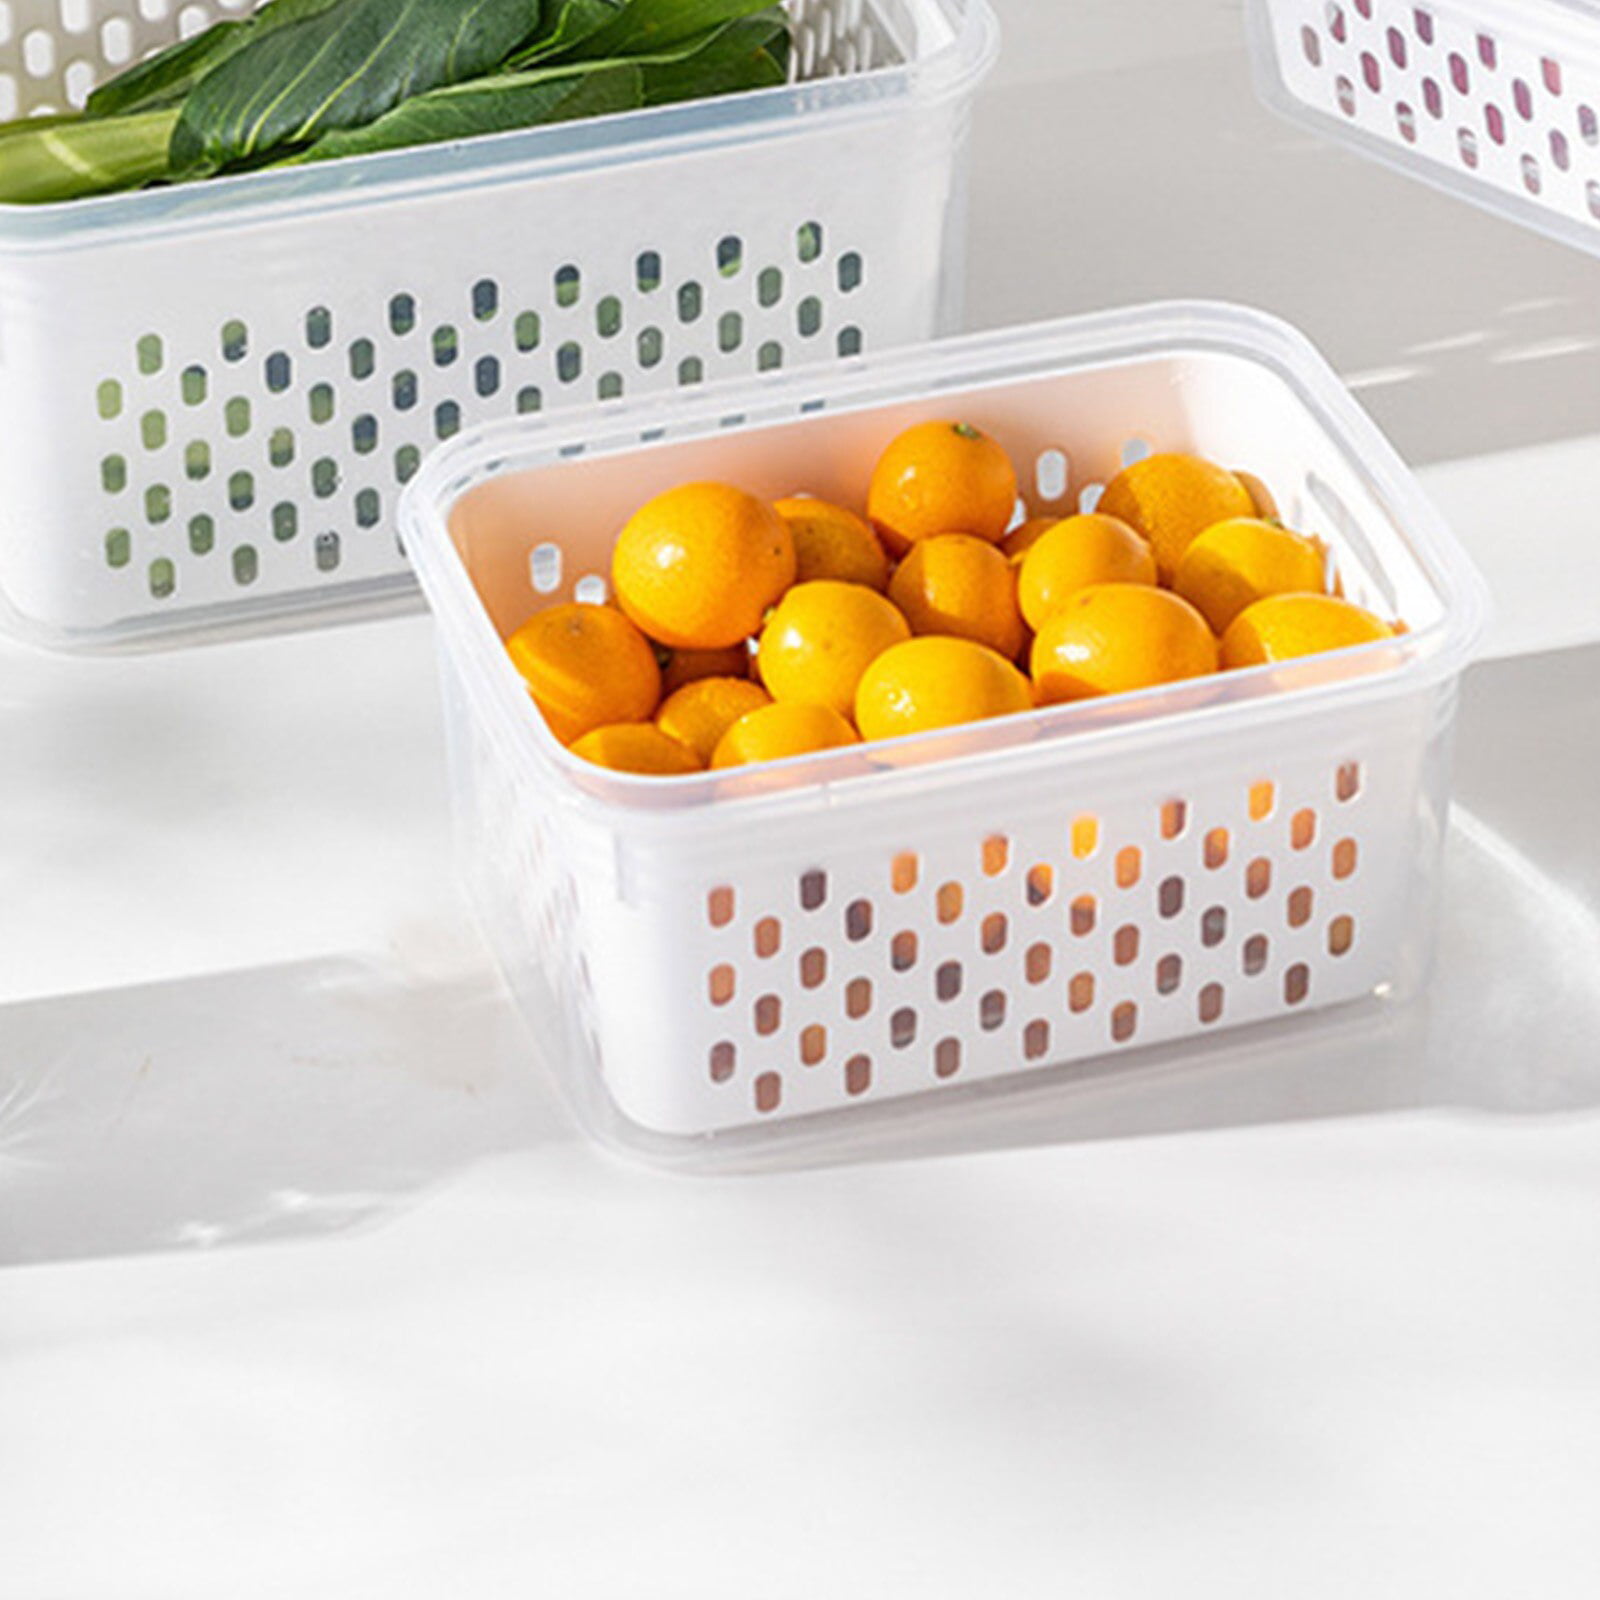 Fruit/Vegetable Storage Containers For Fridege by Genteen,Colander wit